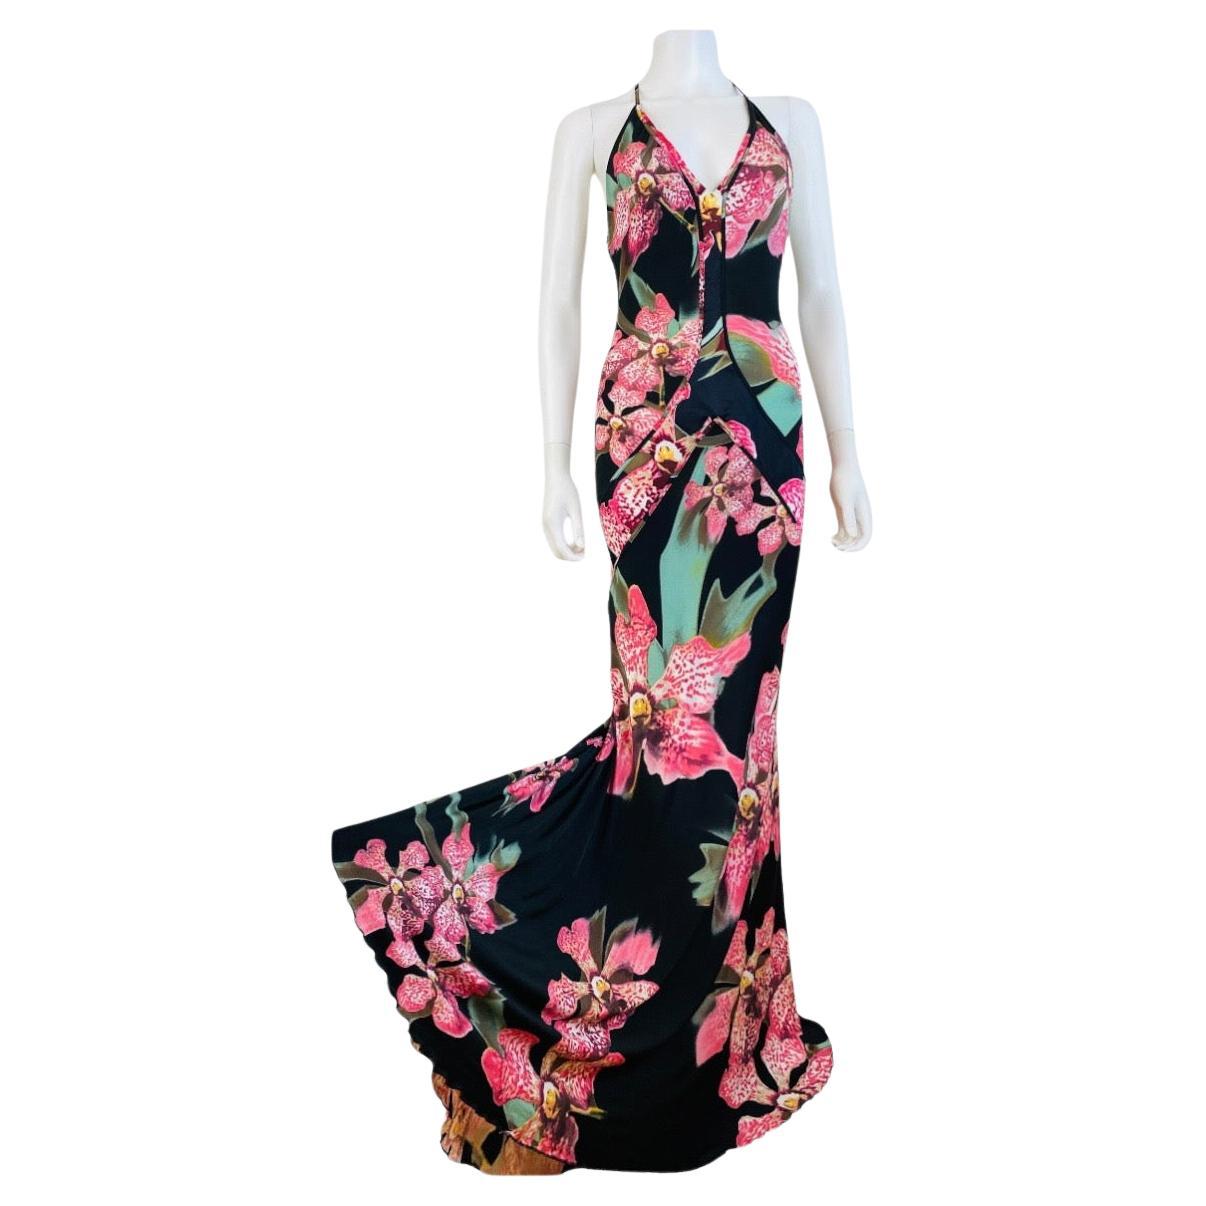 Vintage Roberto Cavalli F/W 2004 Floral Orchid Print Pink + Black Dress Gown For Sale